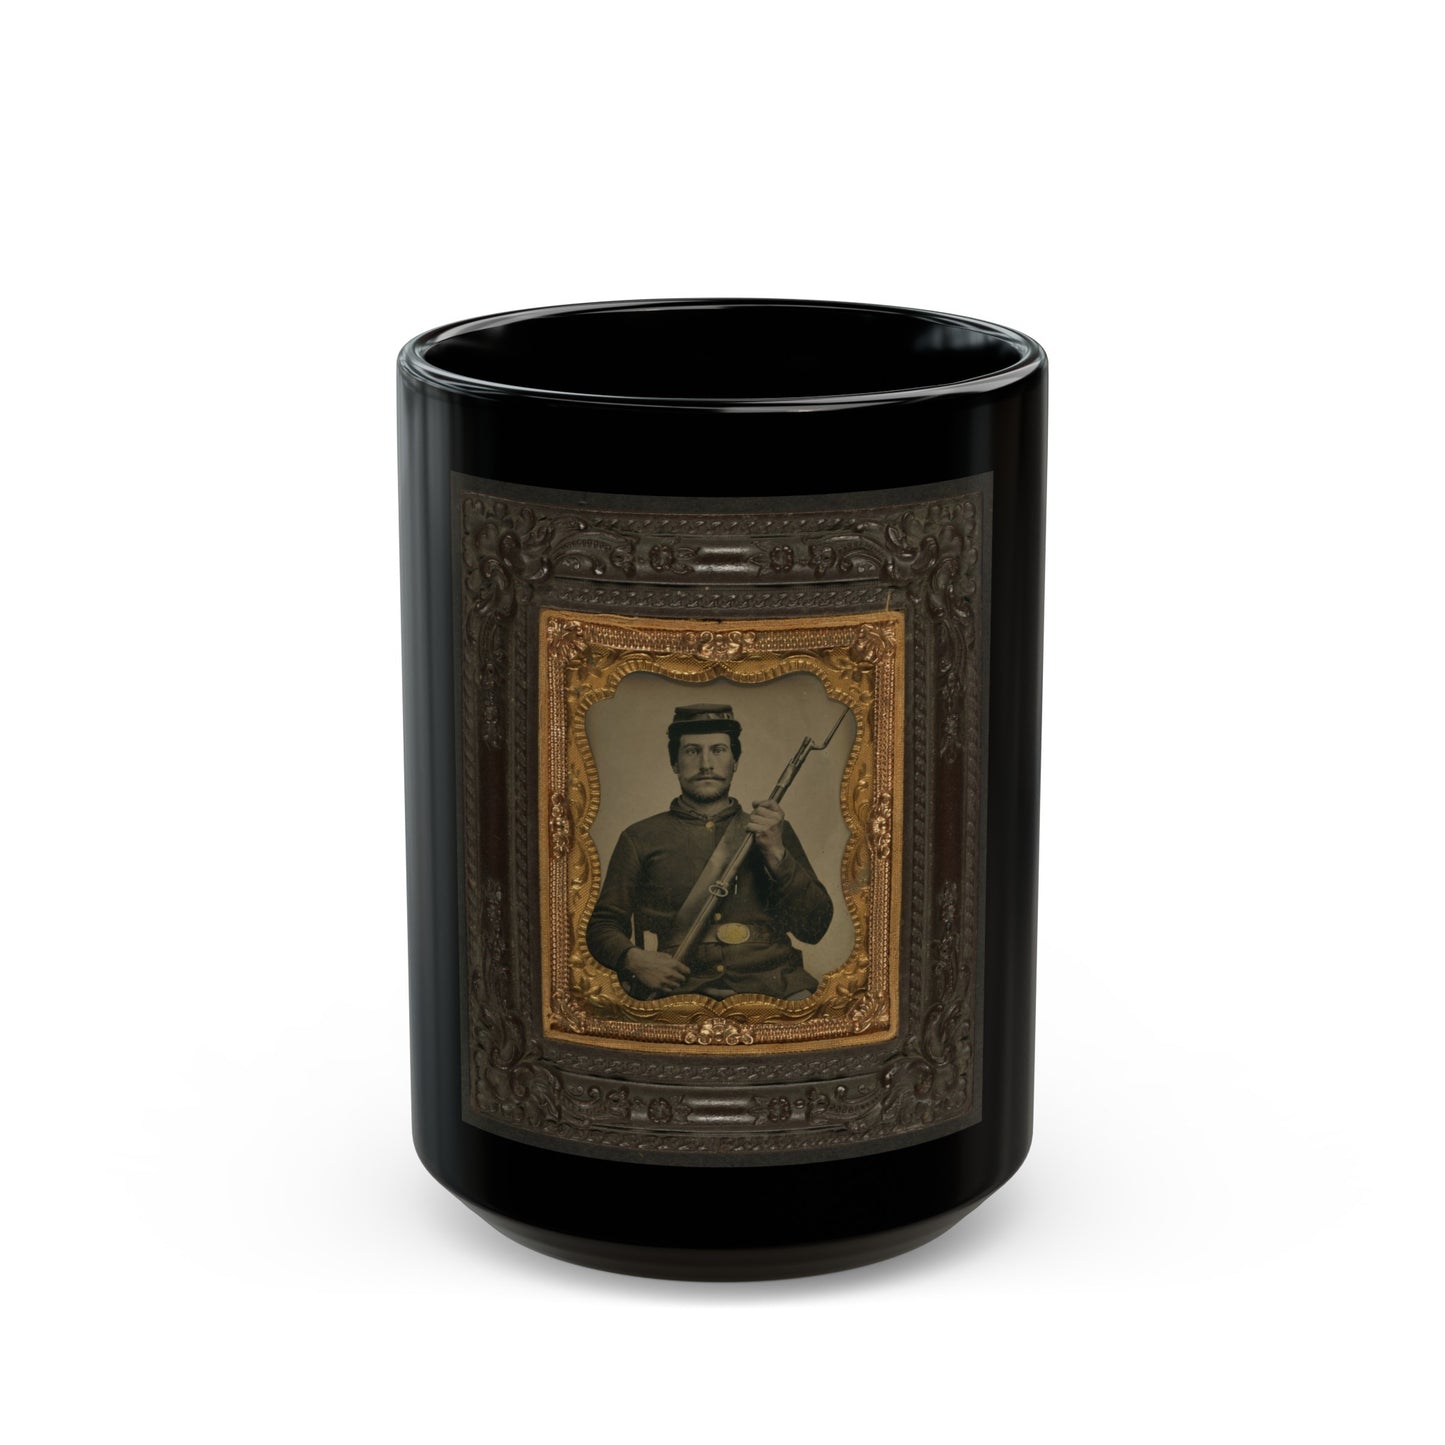 Private William F. Bower Of Company D, 21st Ohio Regiment Infantry Volunteers, With Bayoneted Musket (U.S. Civil War) Black Coffee Mug